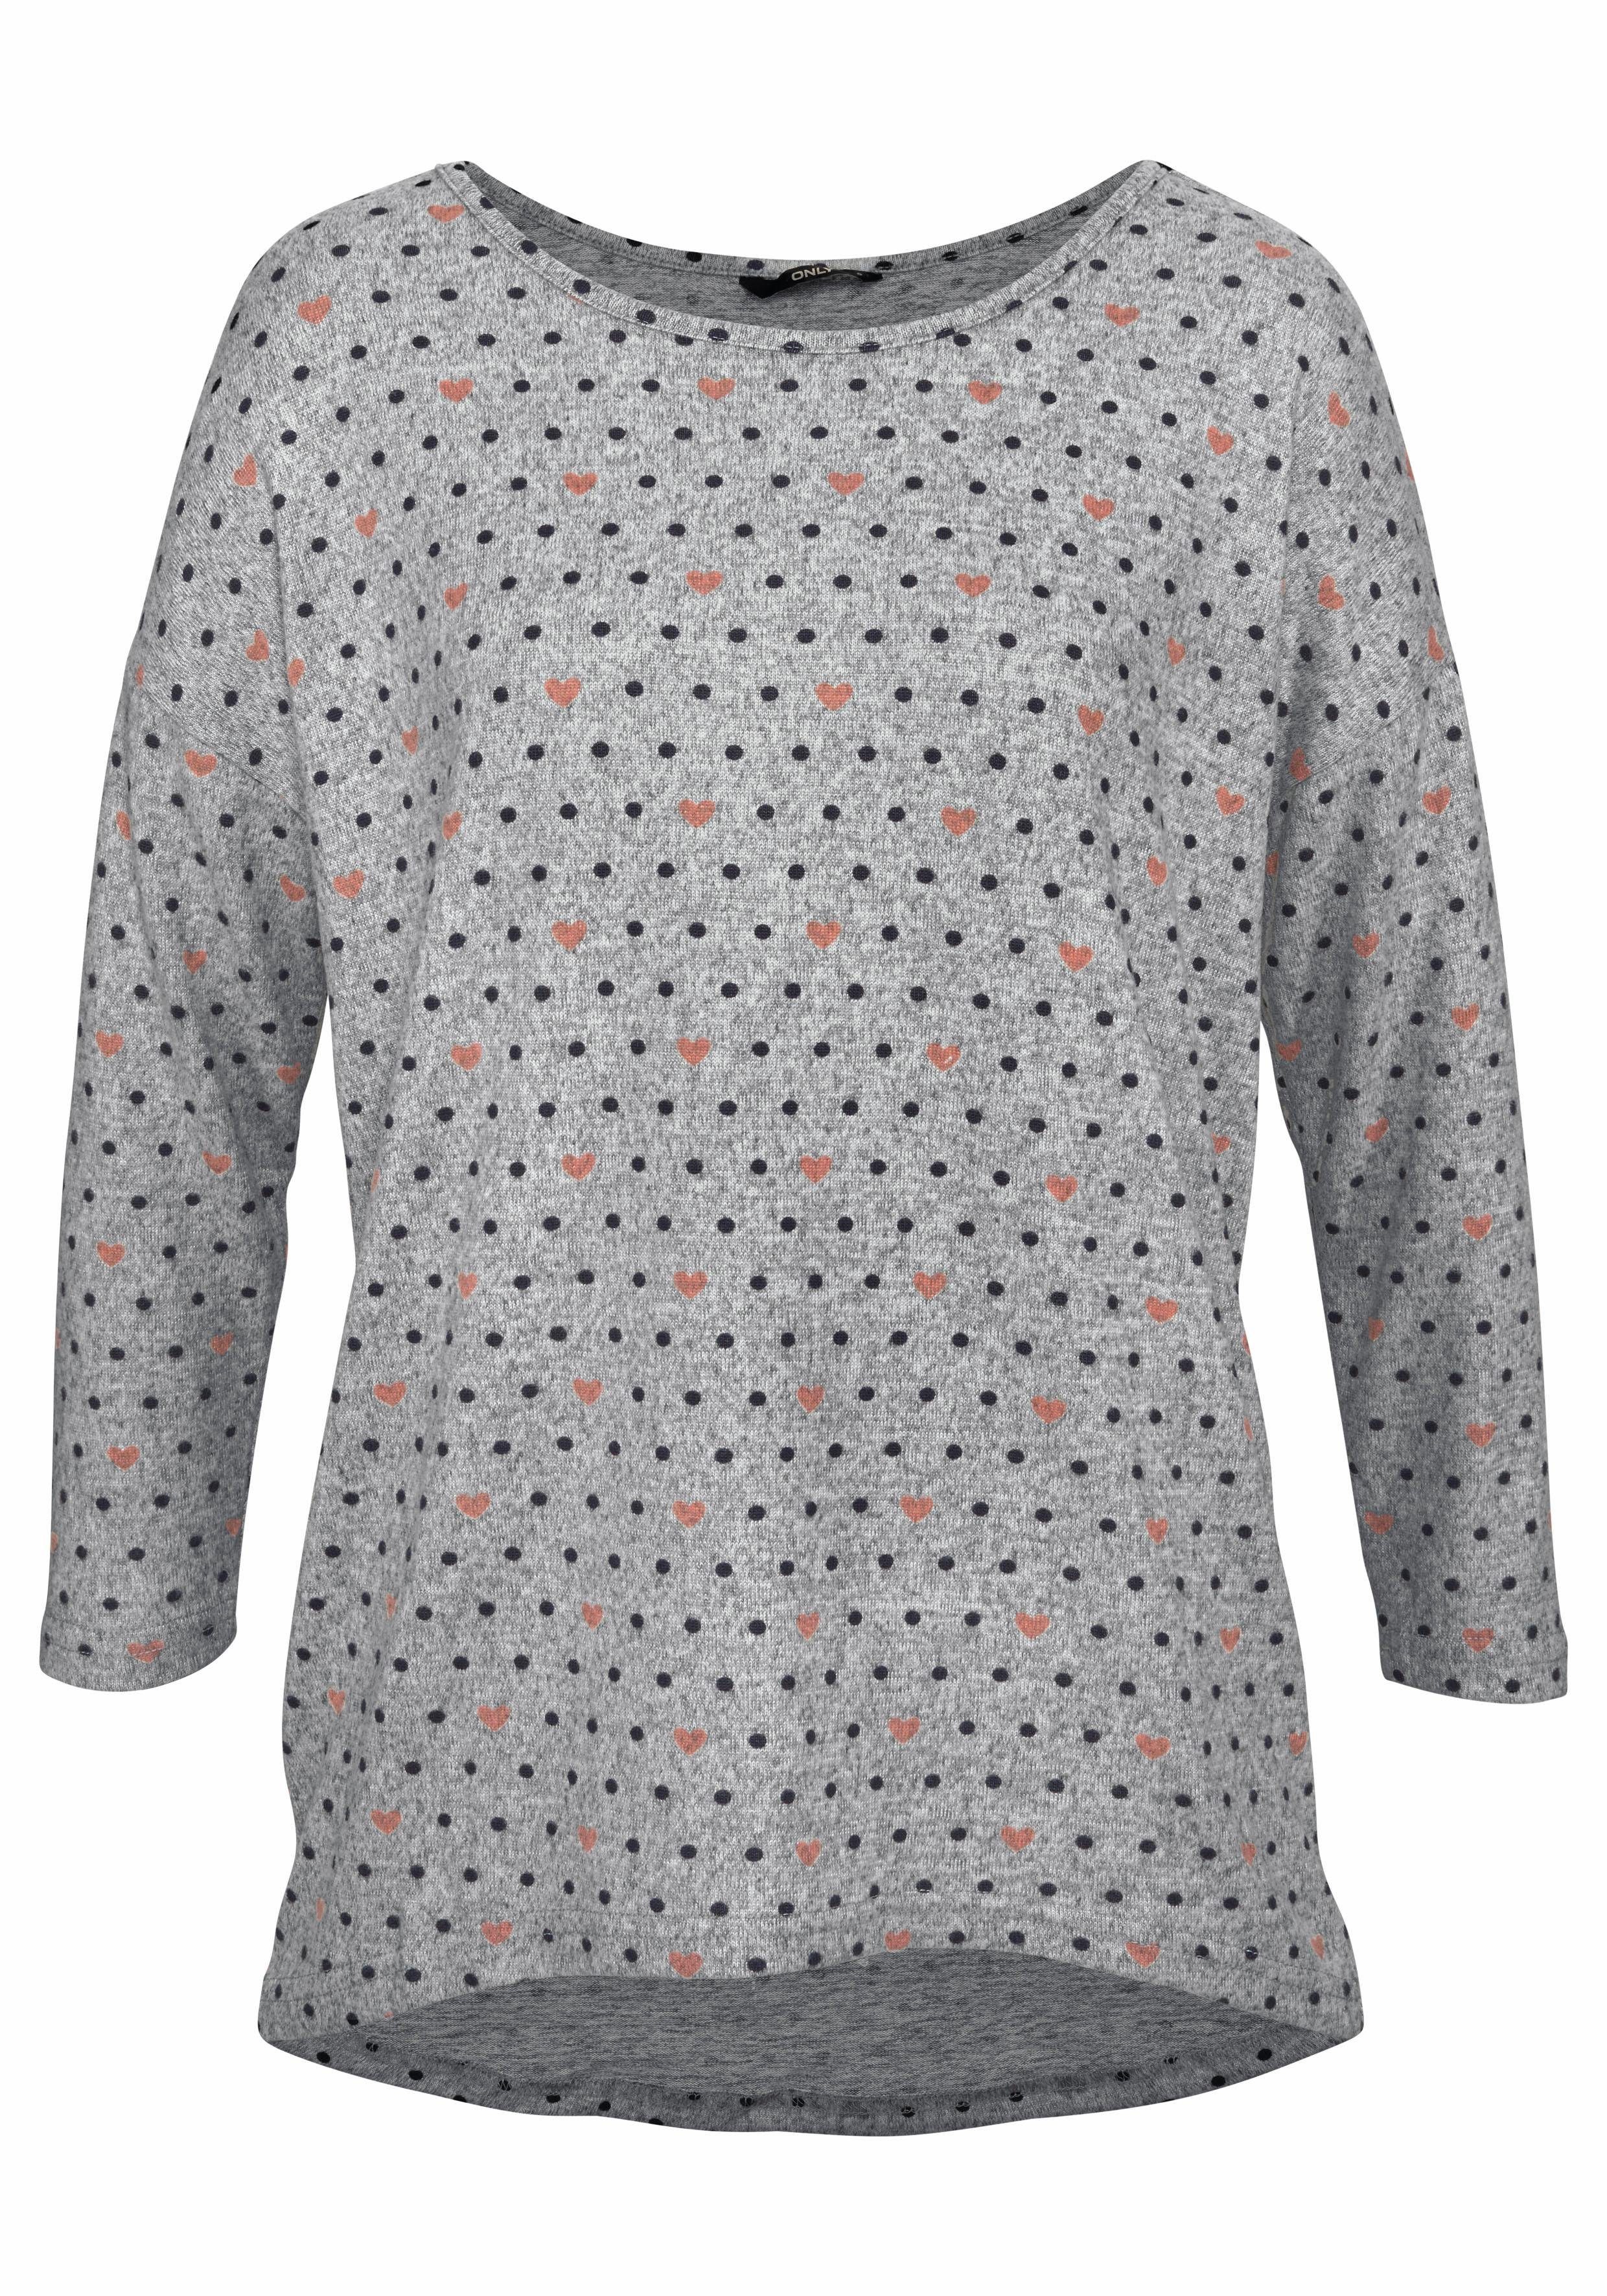 Otto - Only NU 15% KORTING: Only shirt met ronde hals ELCOS